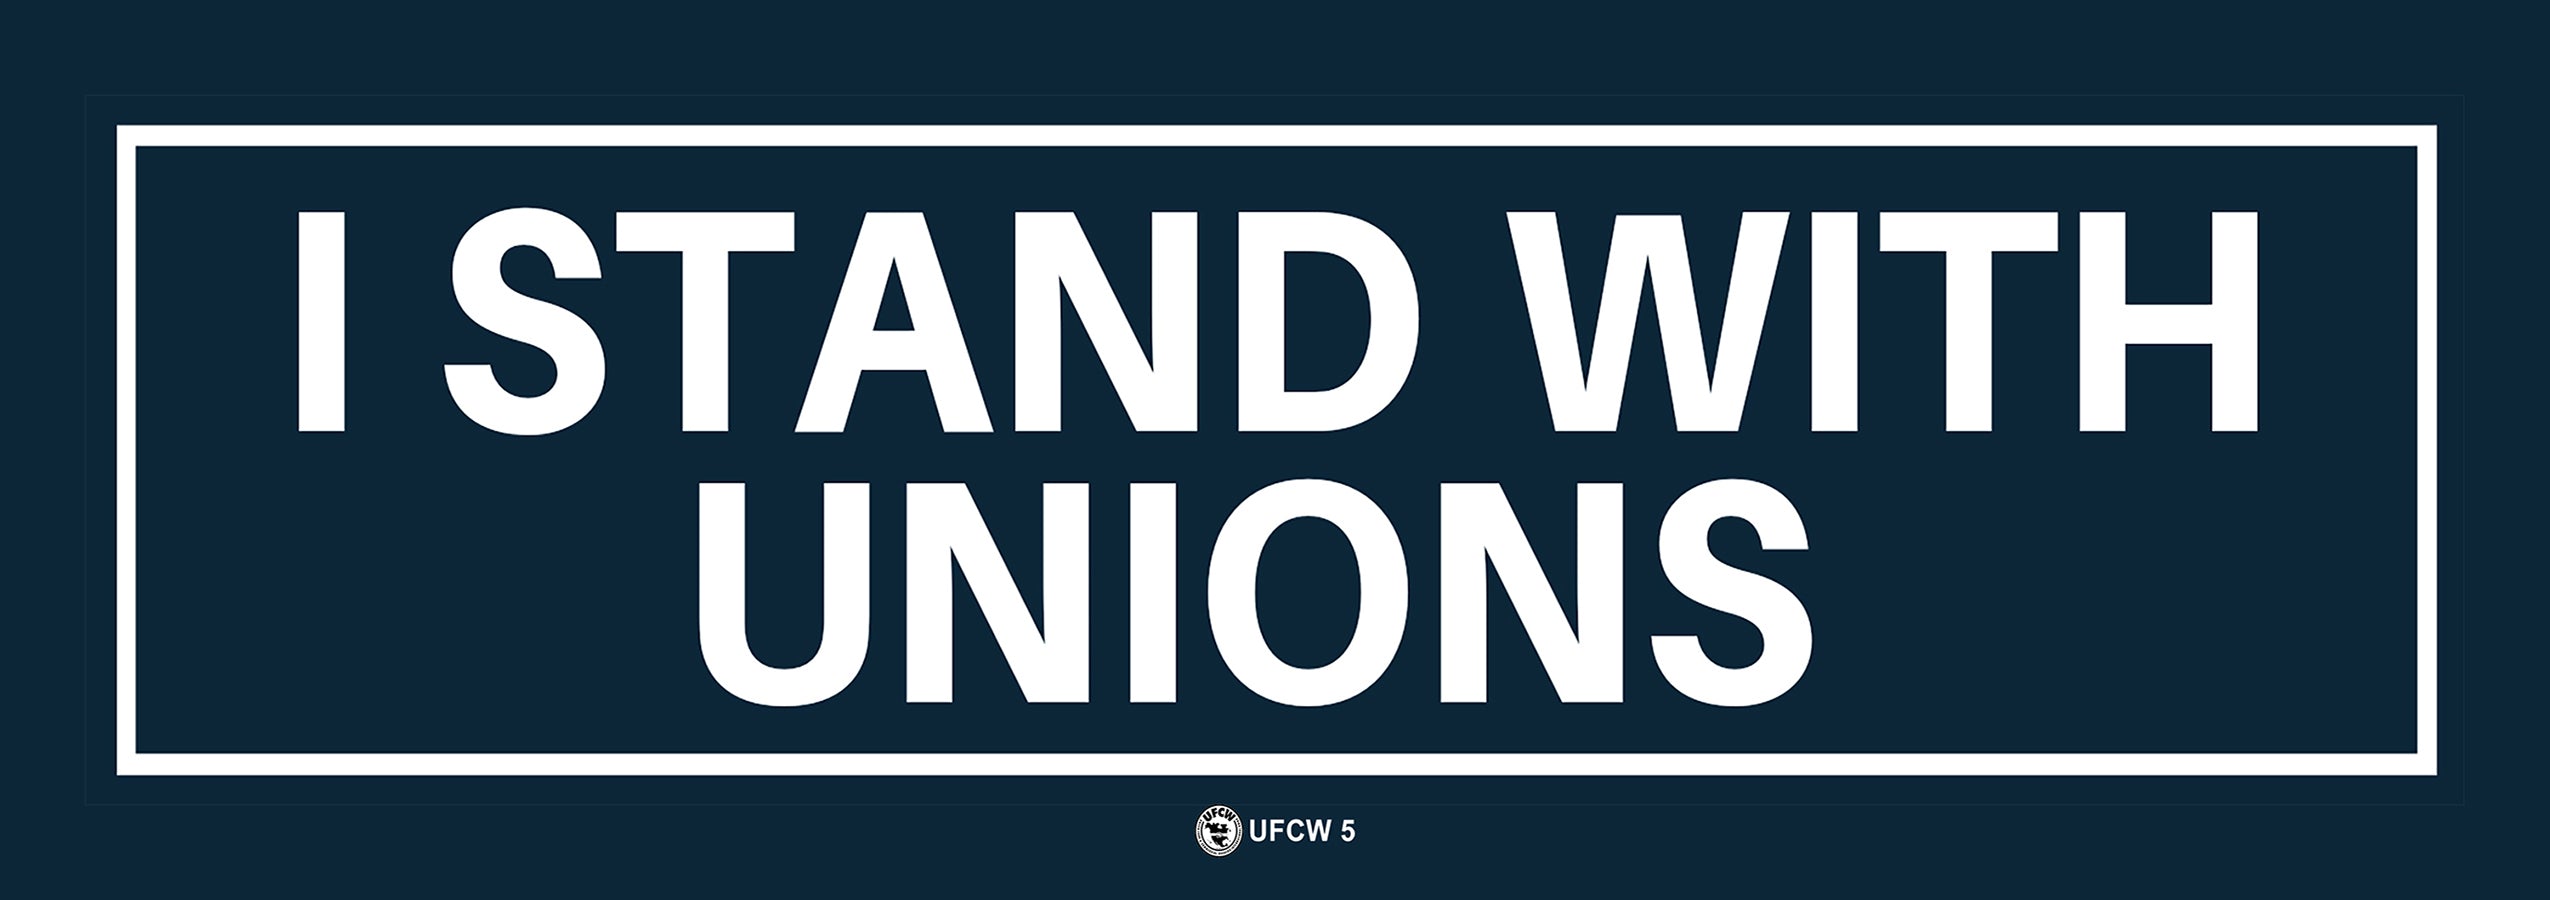 I Stand With Unions Bumper Sticker